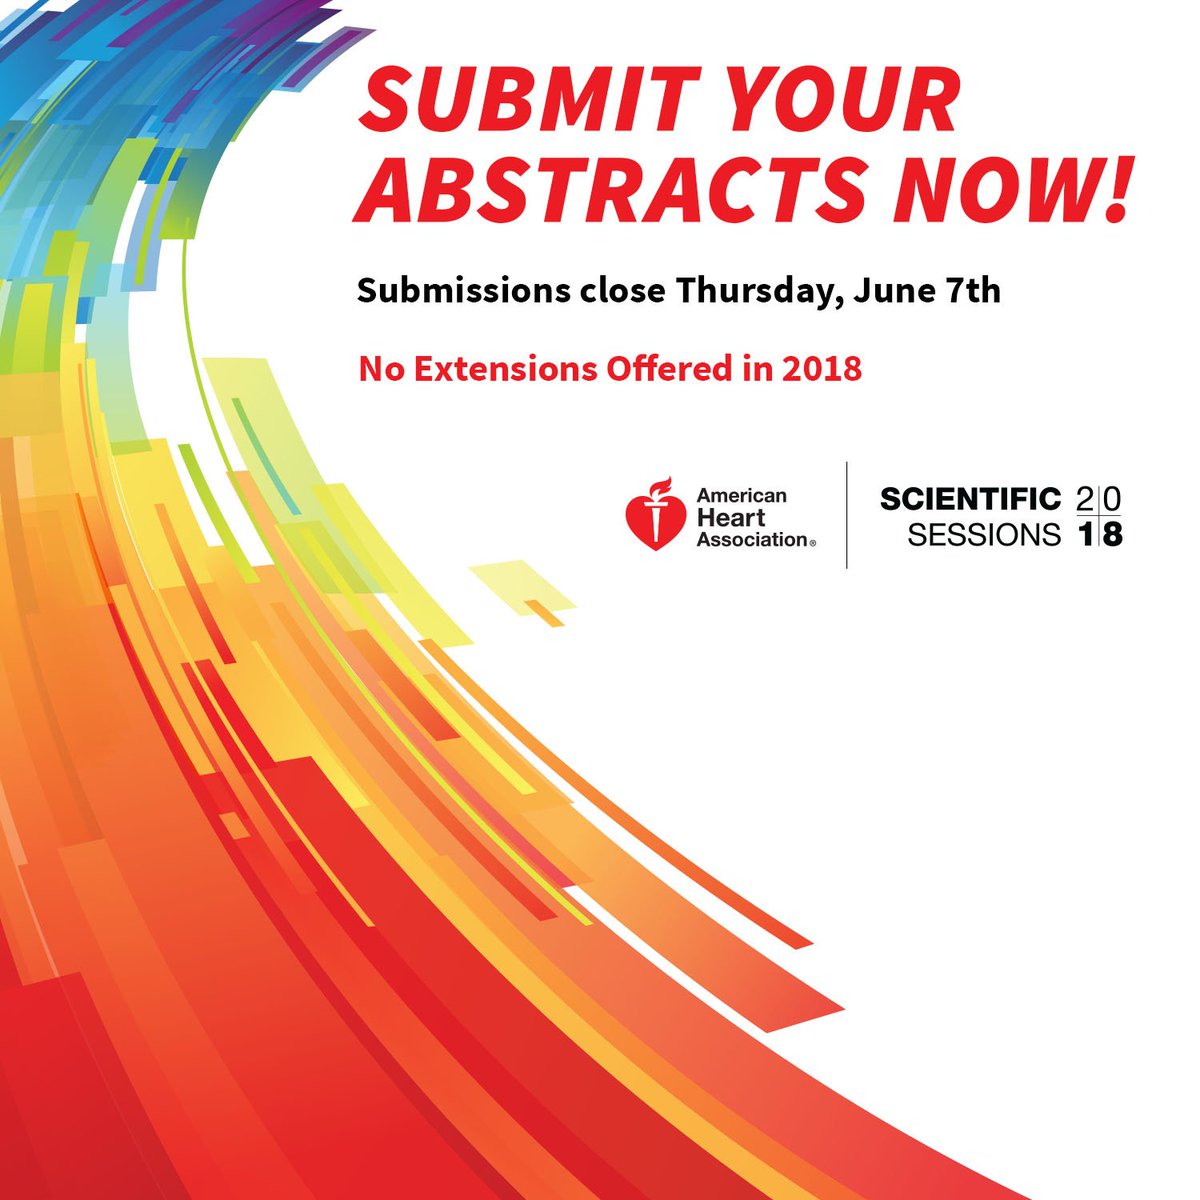 Only 48 hours left to submit abstracts to #AHA18! bit.ly/AHAAbstracts

#CardioTwitter #heartdocs #Cardiology #cardiovascular #cvnurse #heartfailure #cvd #ictus #Hipertension #FibrilacionAuricular #STEMI #EchoFirst #carrotsquad #AFib #LVAD #TAVR #HeartDisease #AHA2018